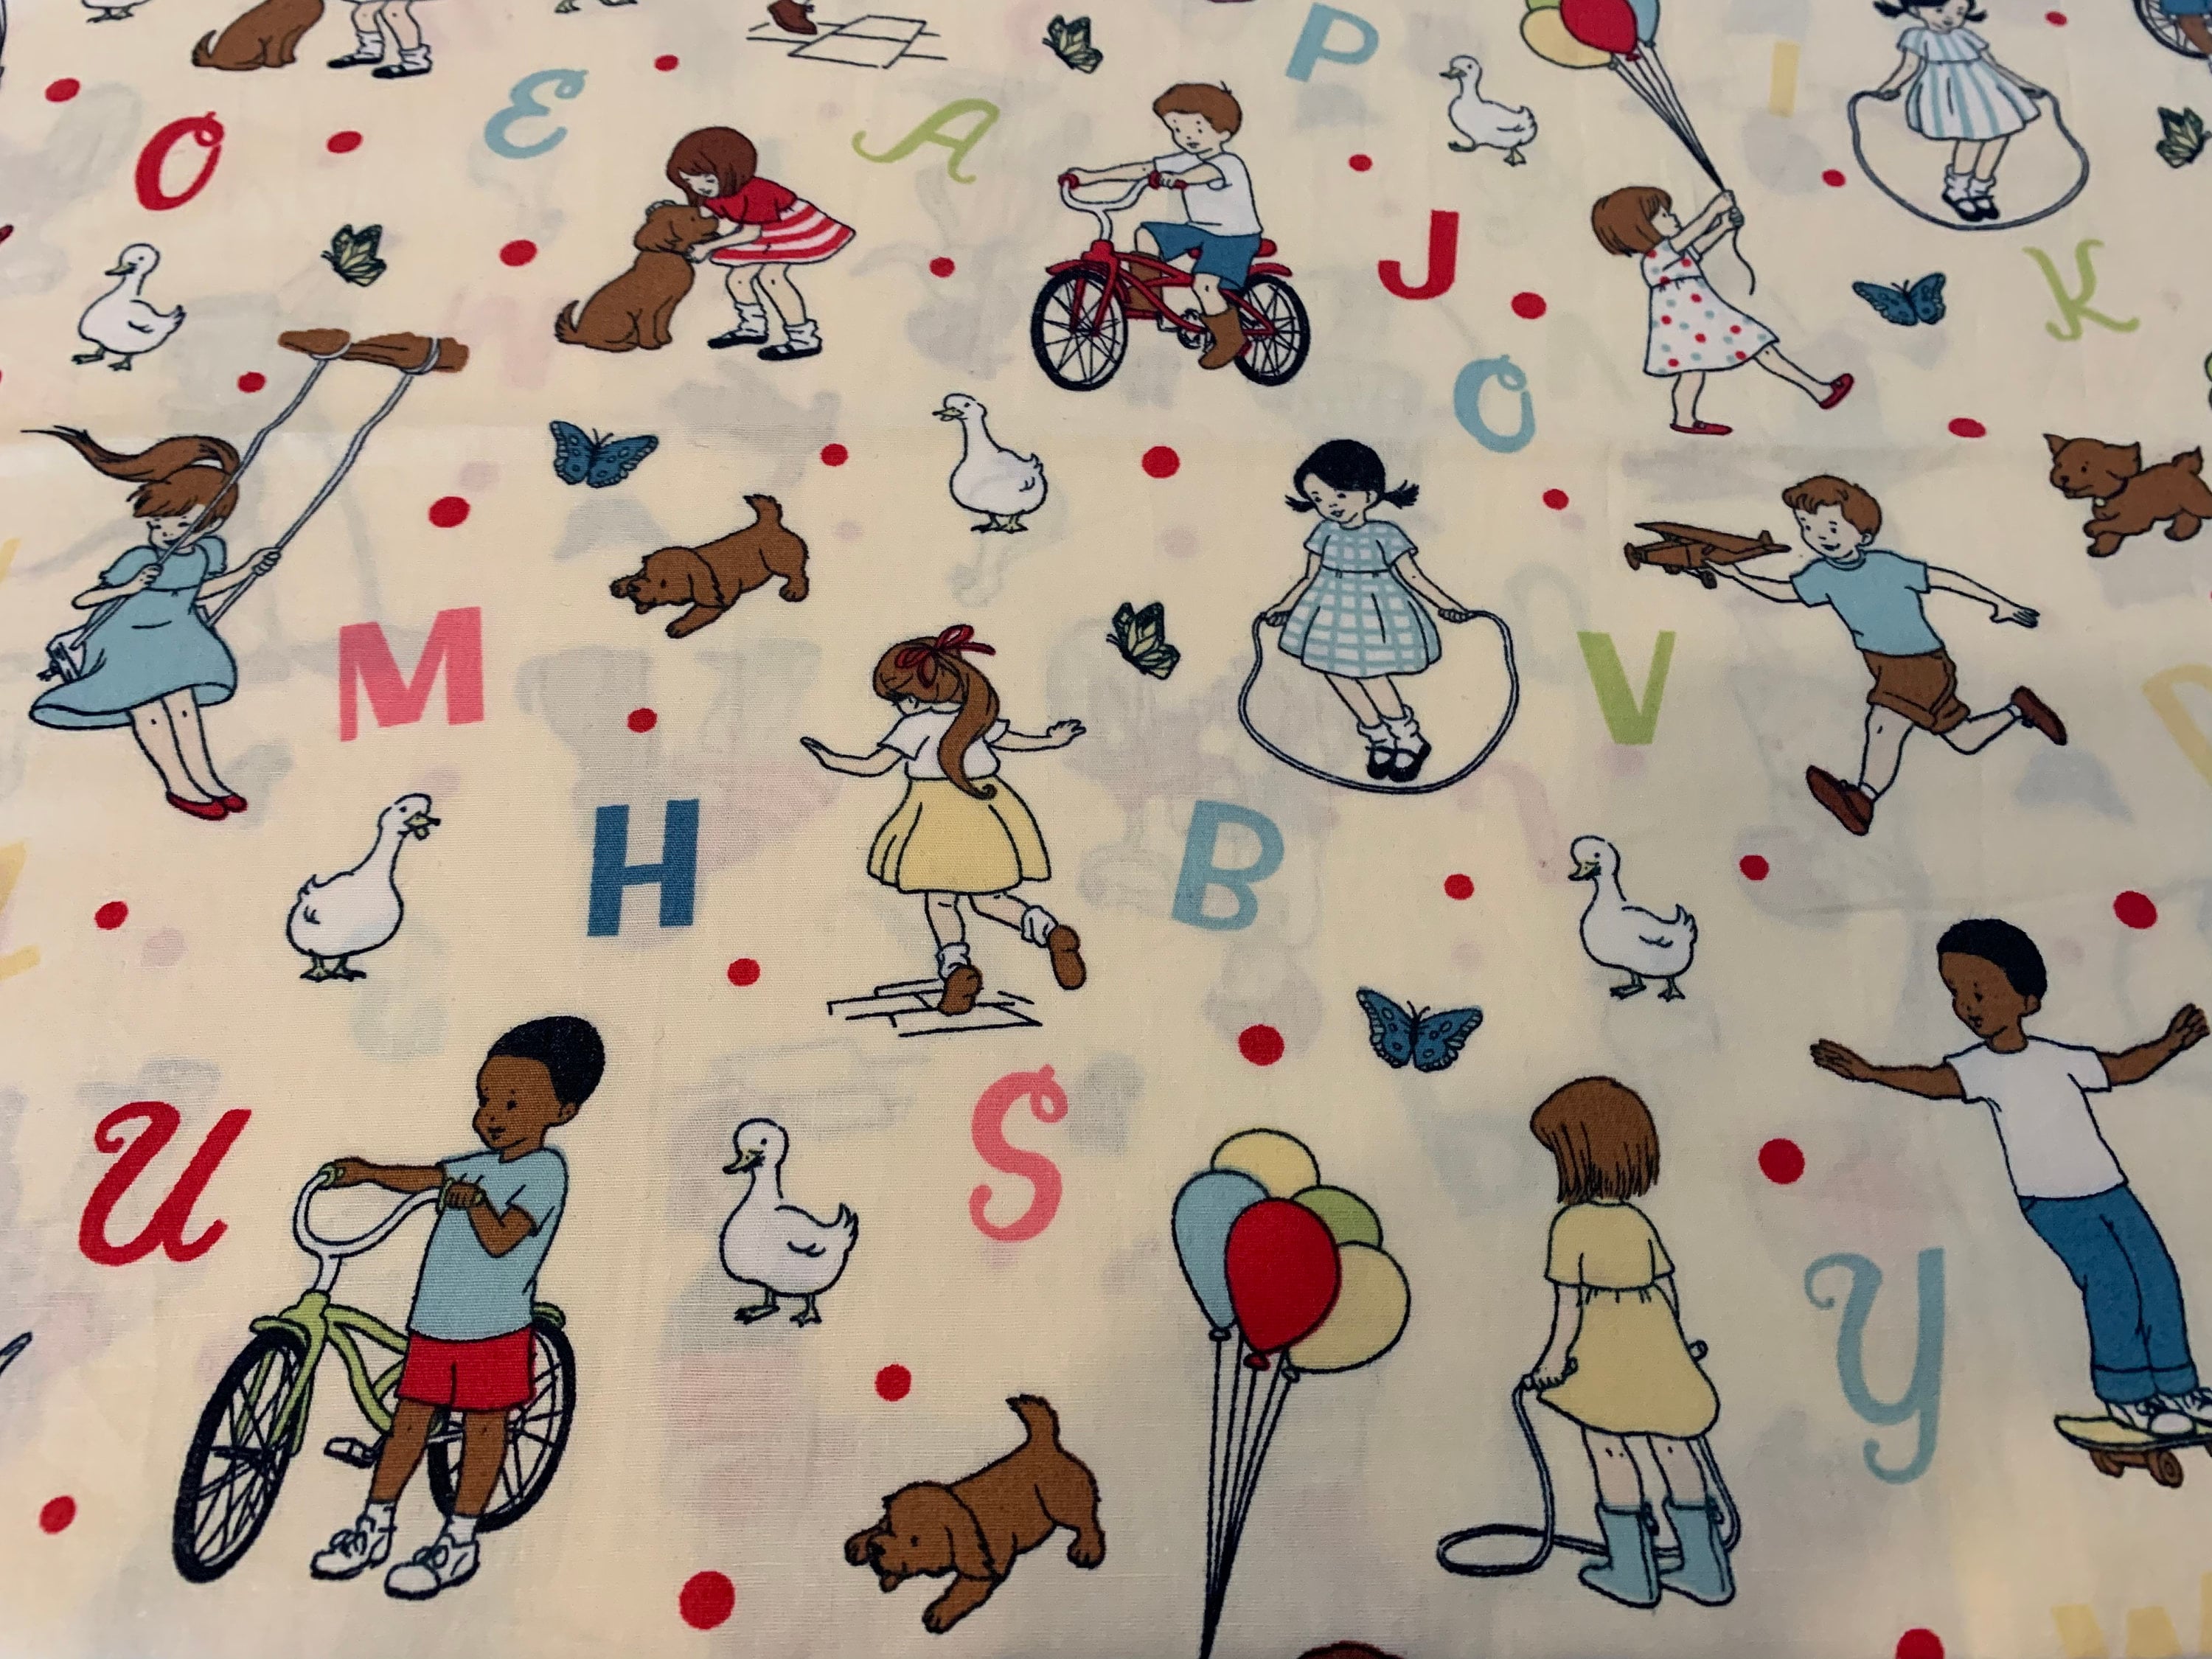 Children Clearance Cotton Quilt Fabric, 100 Percent Cotton, Sold by the Yd  Great Quality, Cute, Baby Boy Girl, on Sale, Discounted Bargain 